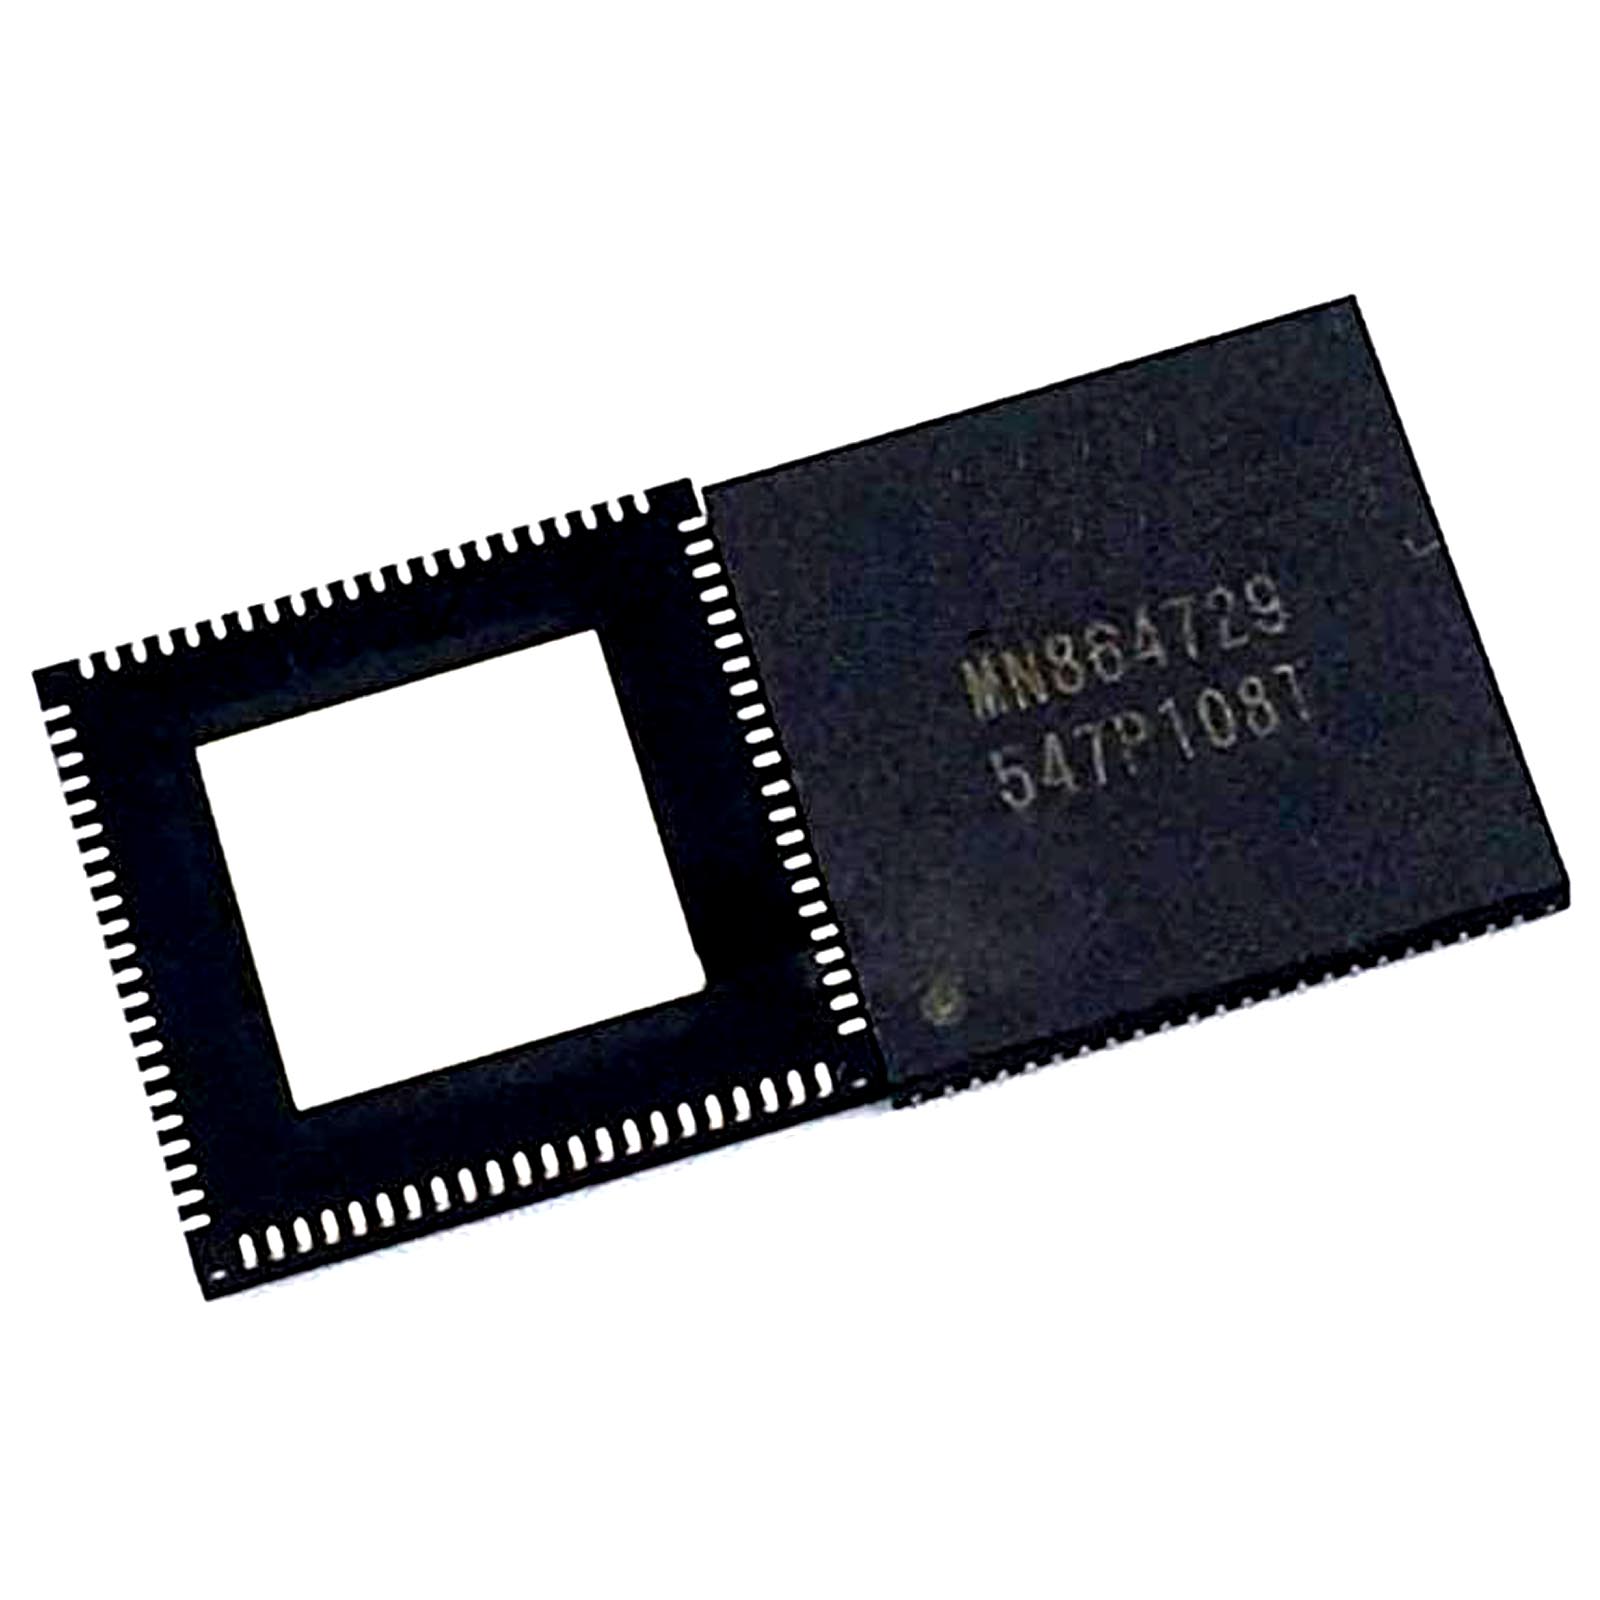 MN864729 PS4 HDMI IC Interface Connector Chip